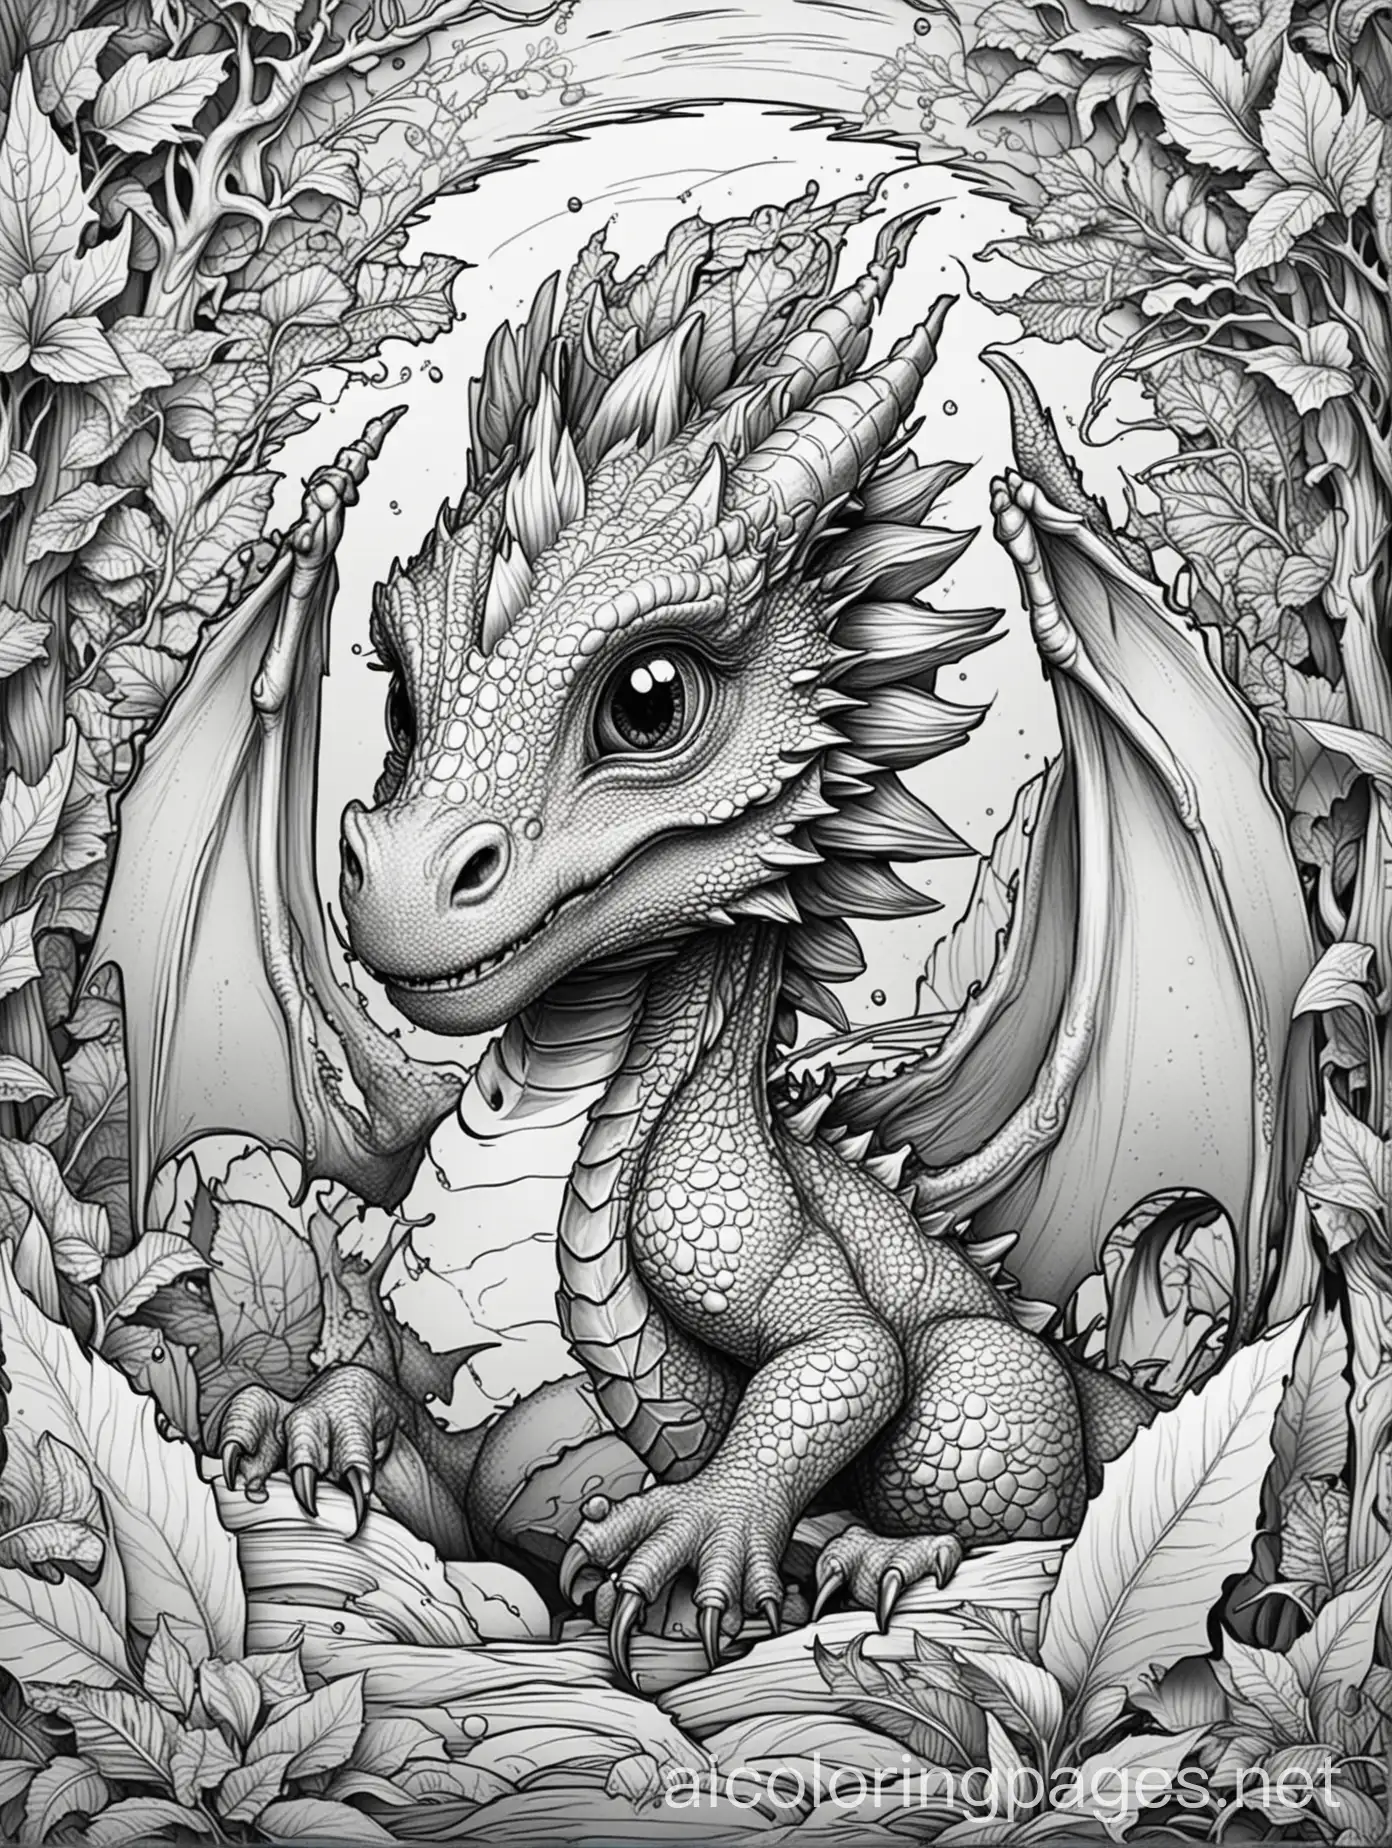 cute baby dragon  design book cover for a Coloring Page for kids, full colored, mate finish Mark Brooks and Dan Mumford, comic book art, perfect, smooth , Coloring Page, black and white, line art, white background, Simplicity, Ample White Space. The background of the coloring page is plain white to make it easy for young children to color within the lines. The outlines of all the subjects are easy to distinguish, making it simple for kids to color without too much difficulty